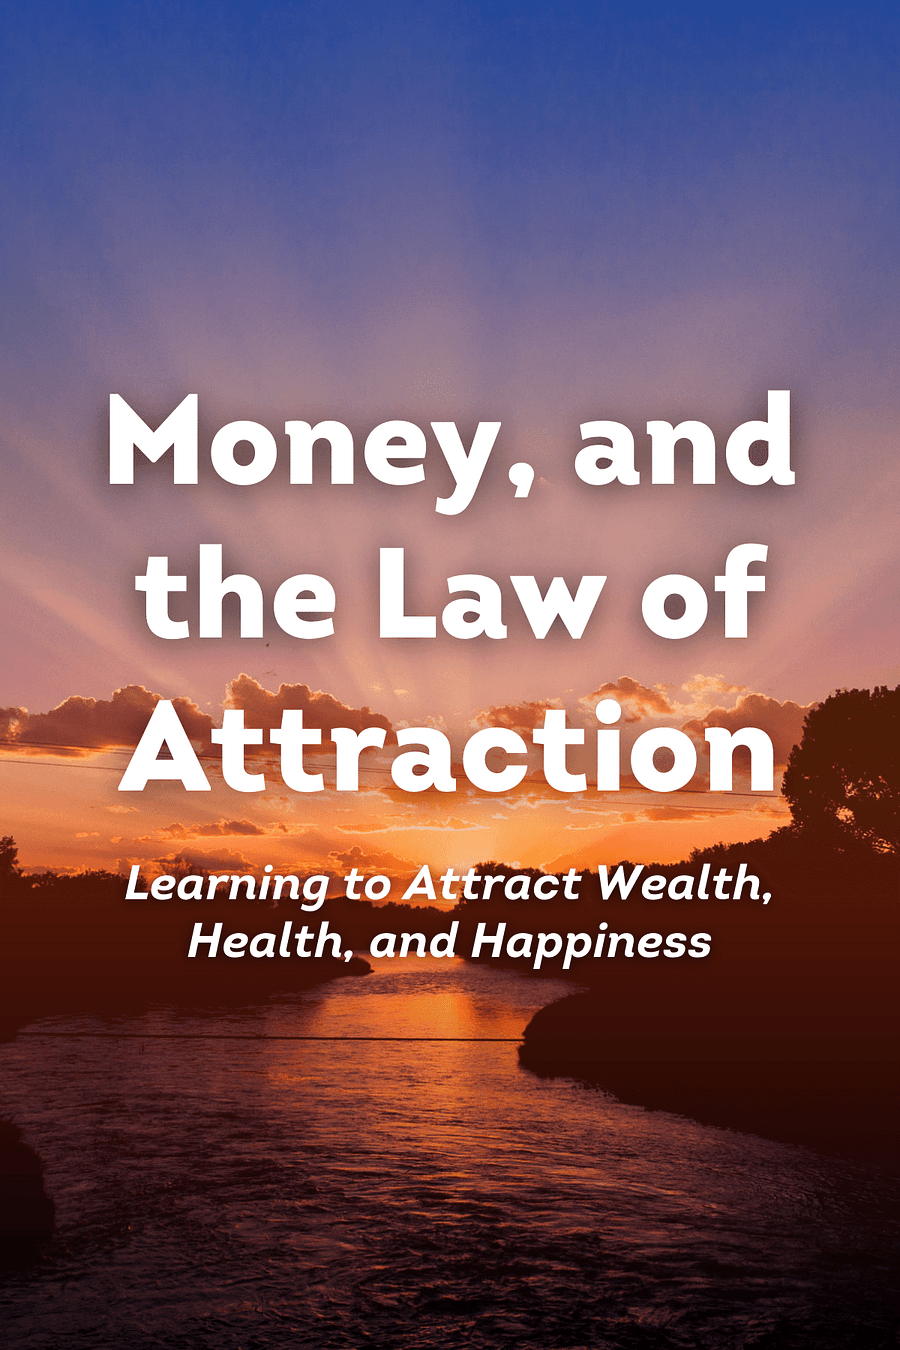 Money, and the Law of Attraction by Esther Hicks, Jerry Hicks - Book Summary